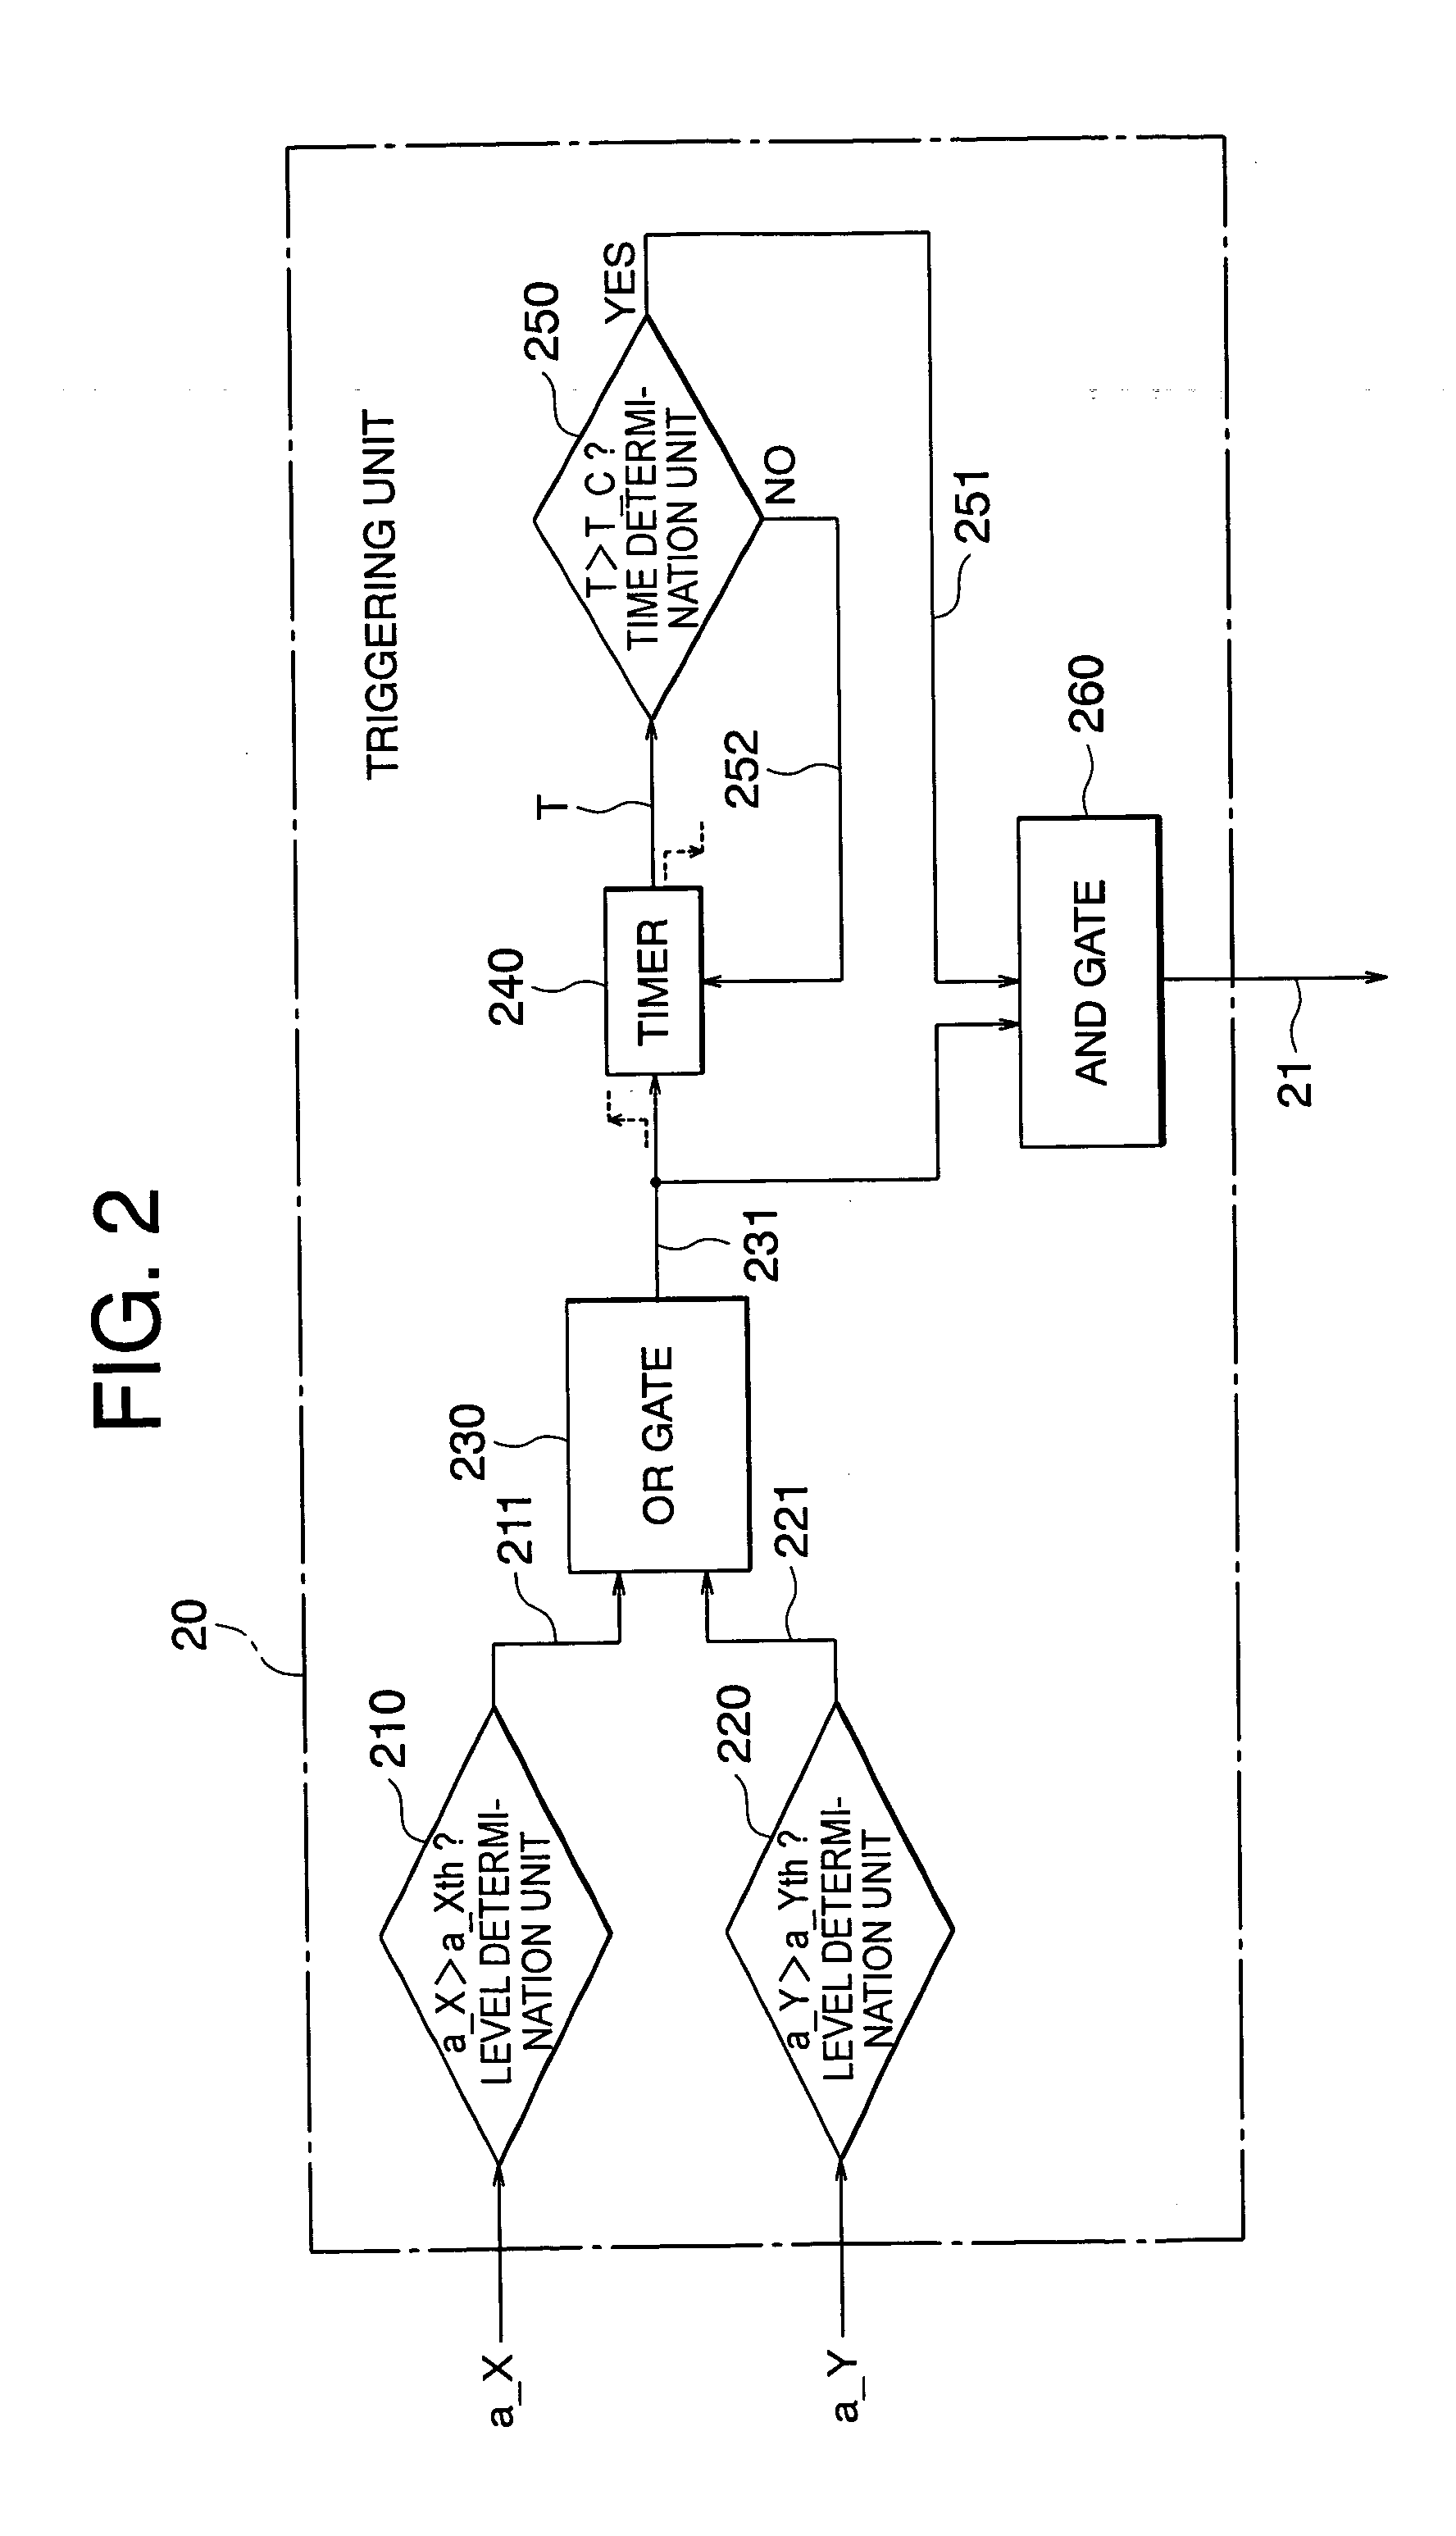 Vehicle accident analyzing apparatus